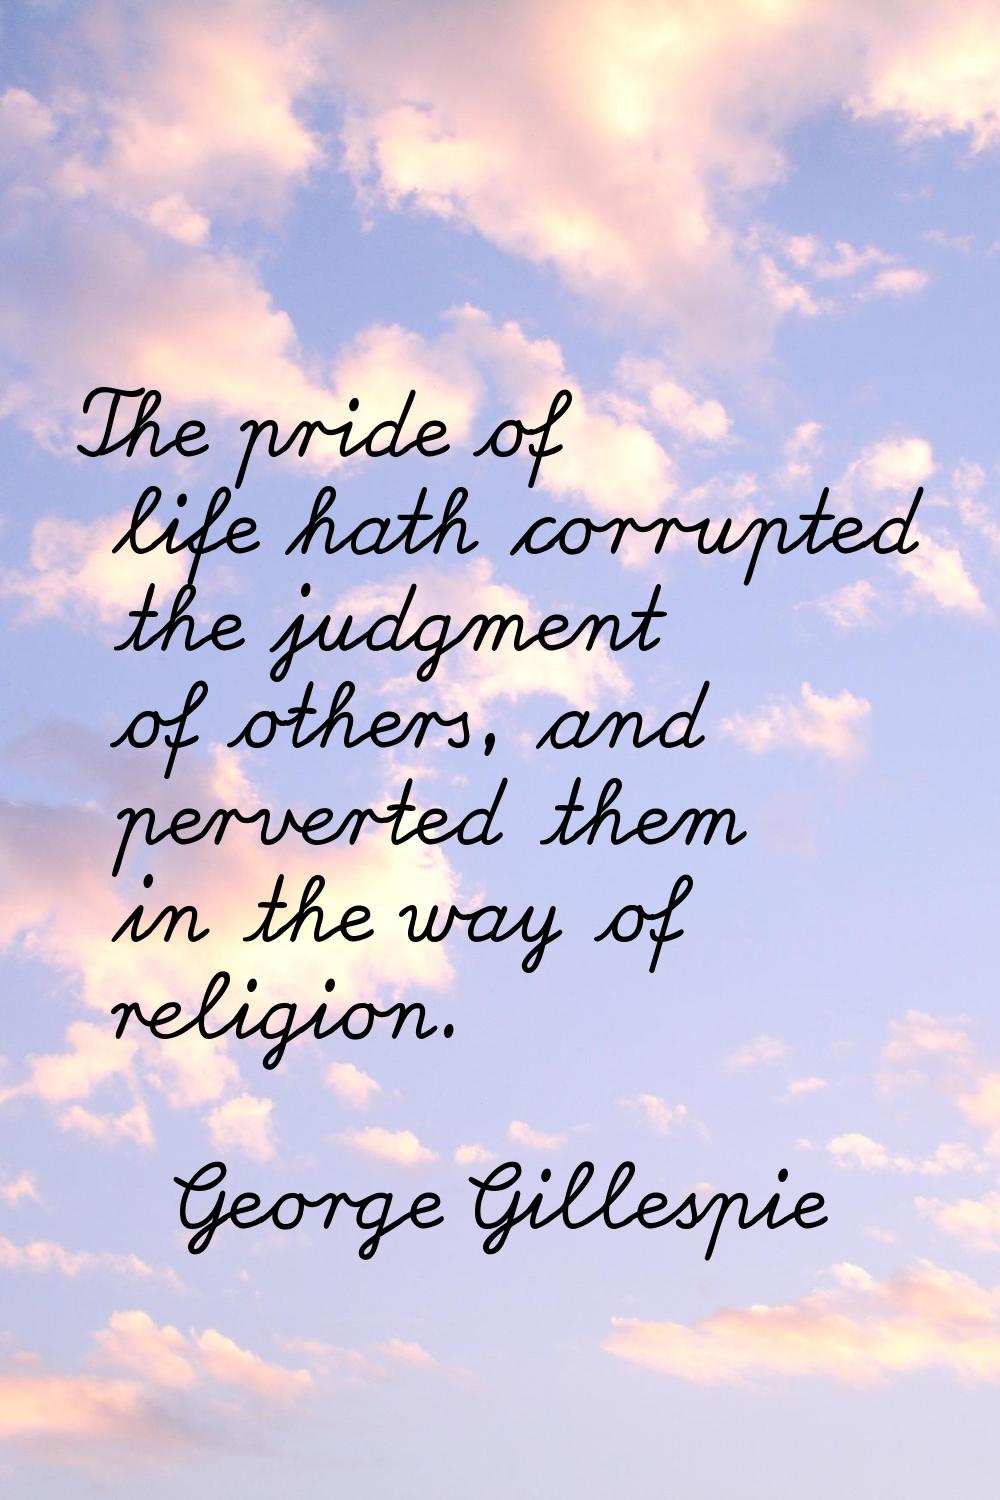 The pride of life hath corrupted the judgment of others, and perverted them in the way of religion.